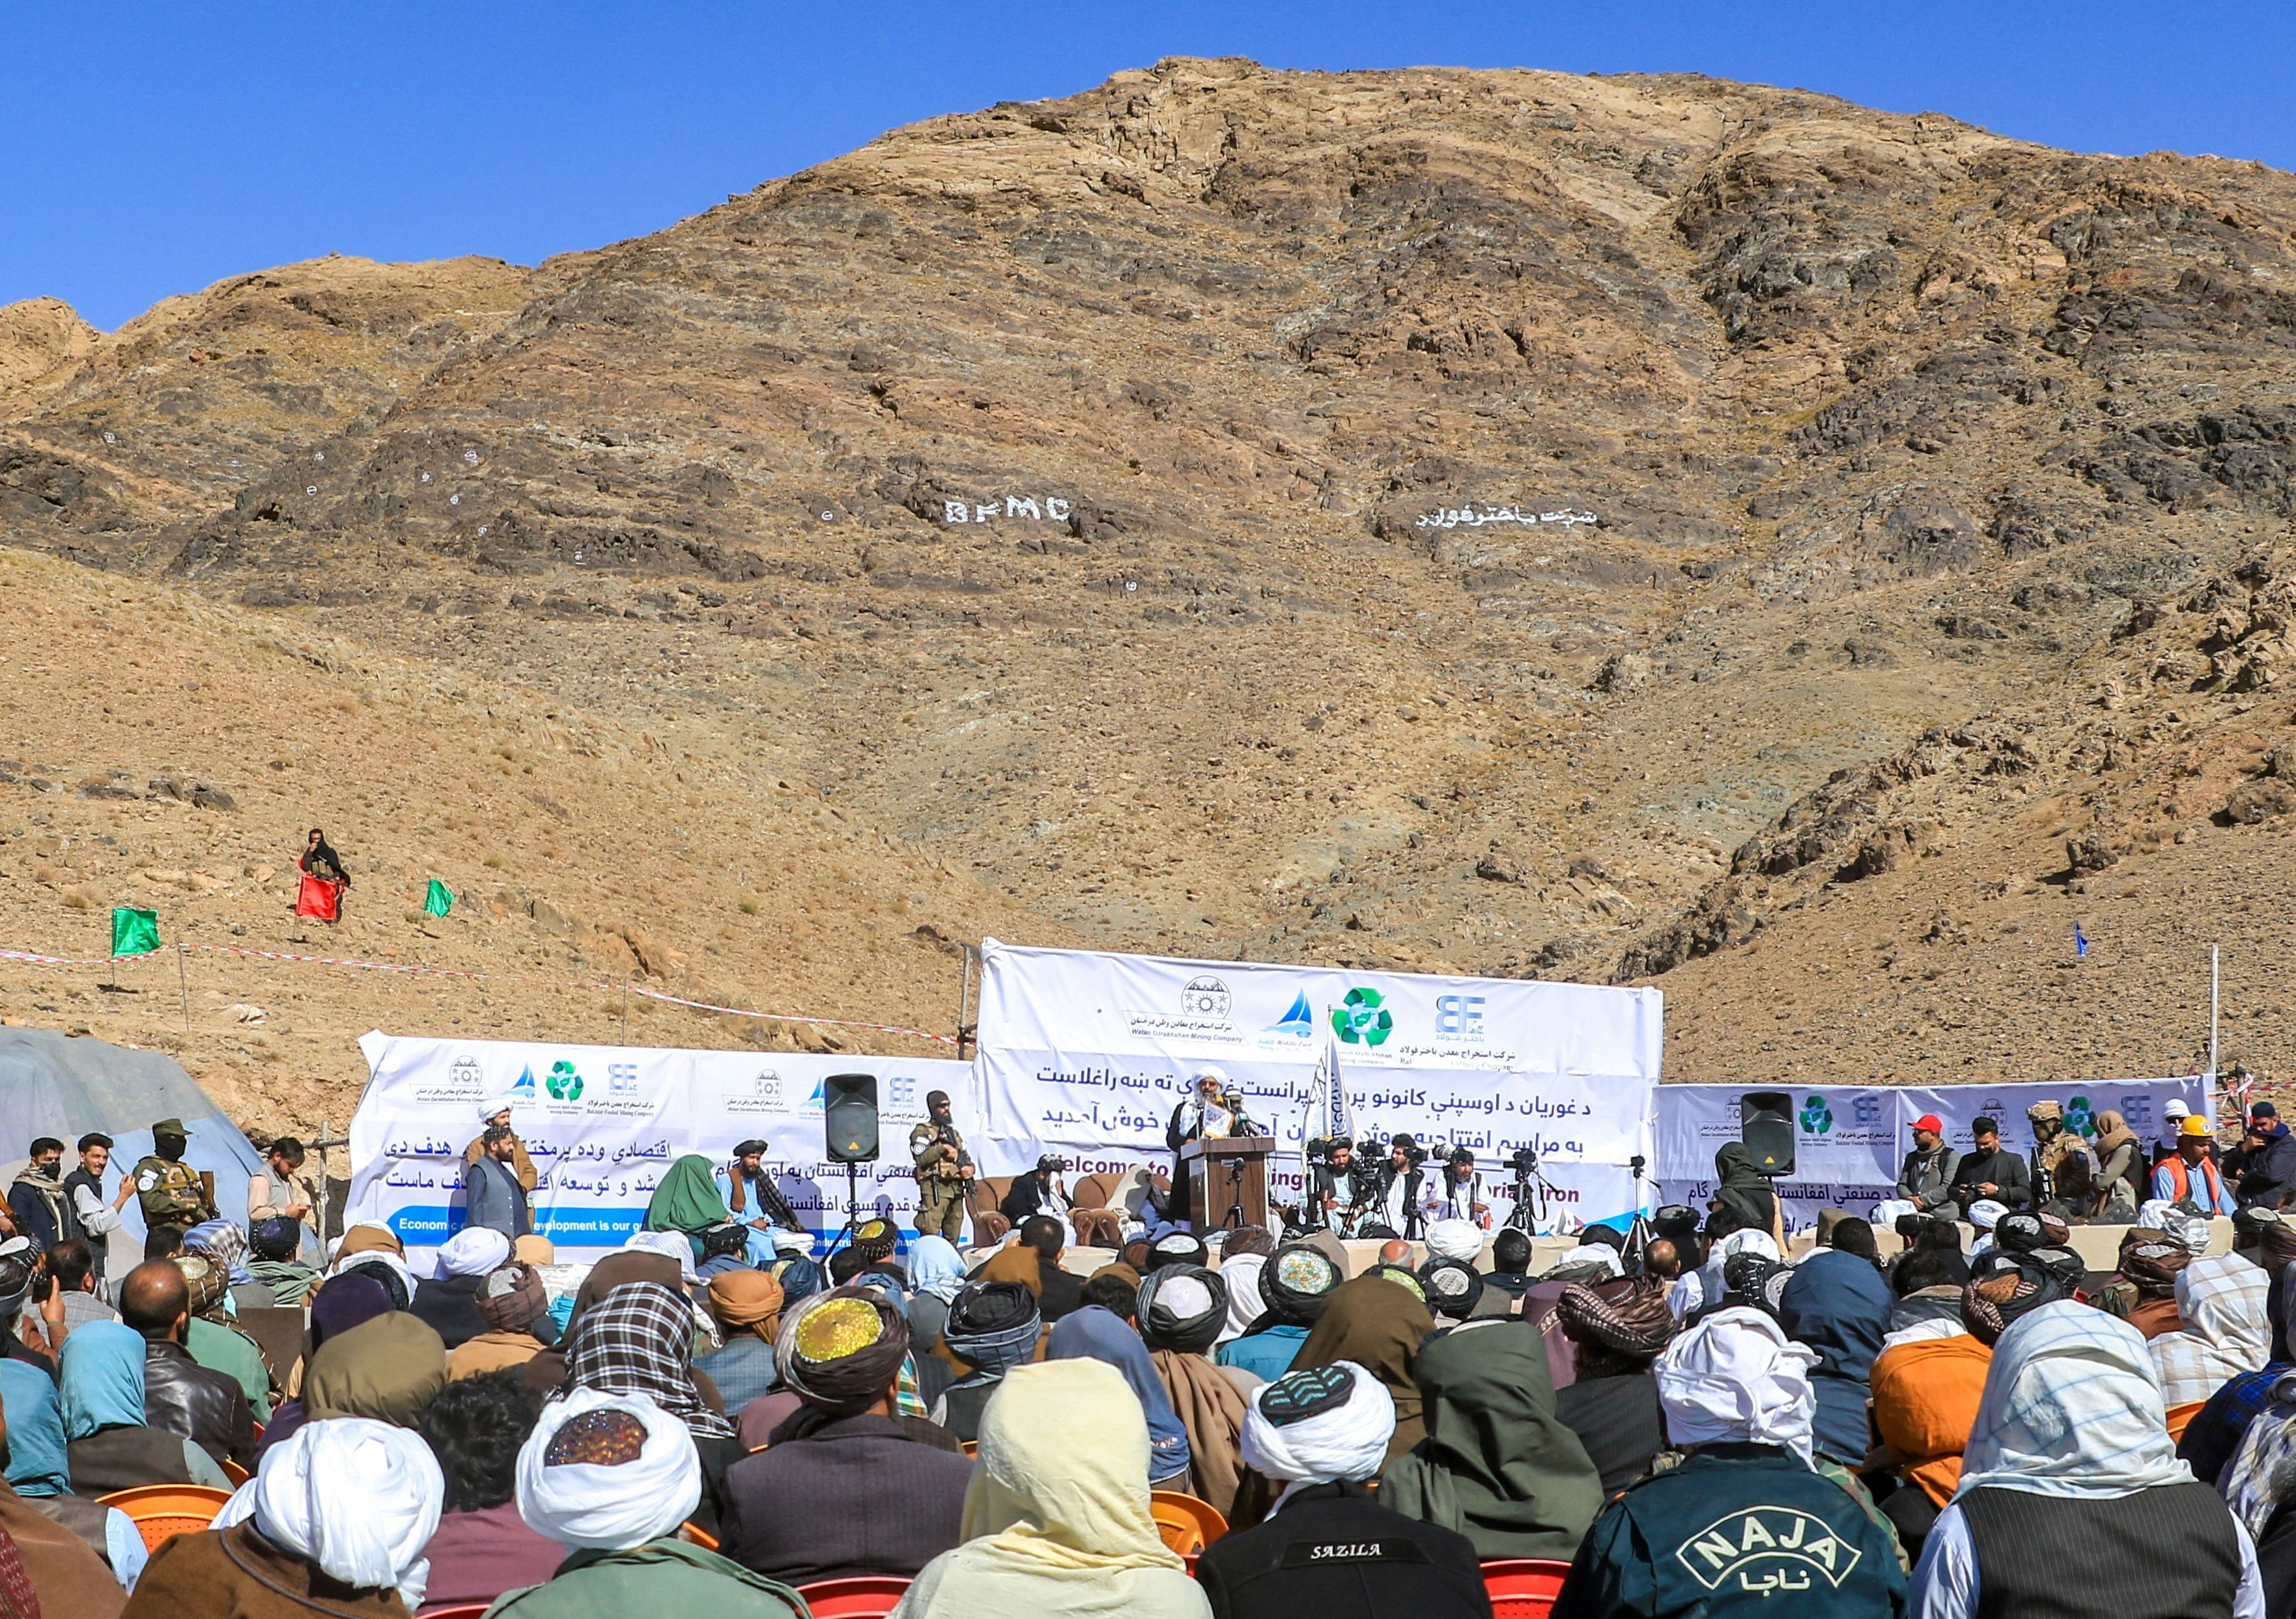 Image showing a crowd attending an event in front of a mountainous terrain. Men are seated before a lectern which has a speaker standing at it. Behind the speaker are posters.